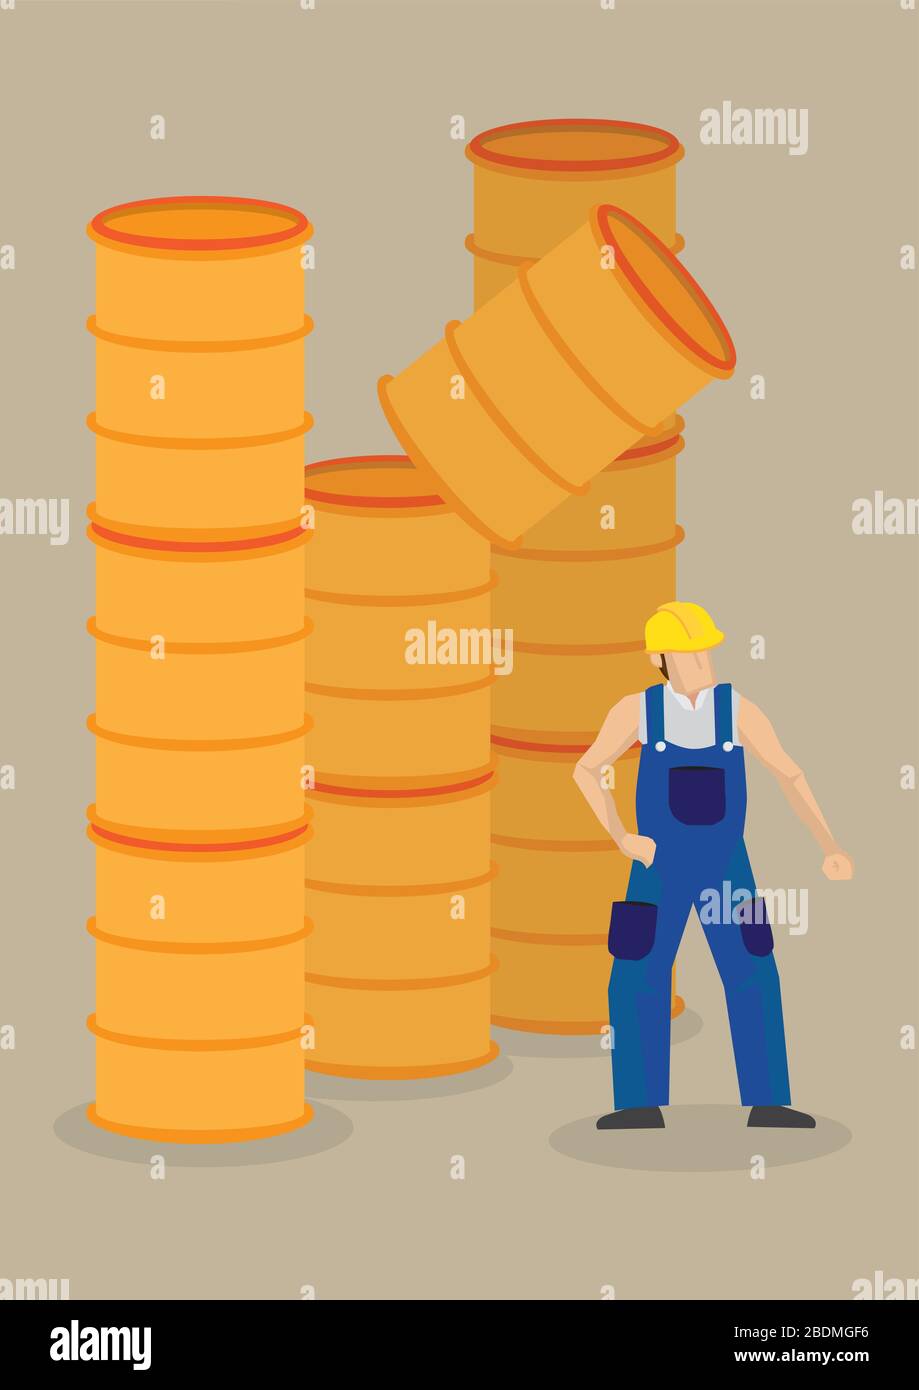 Worker under a falling barrel. Vector cartoon illustration on falling objects hazards and workplace accident concept isolated on plain background. Stock Vector